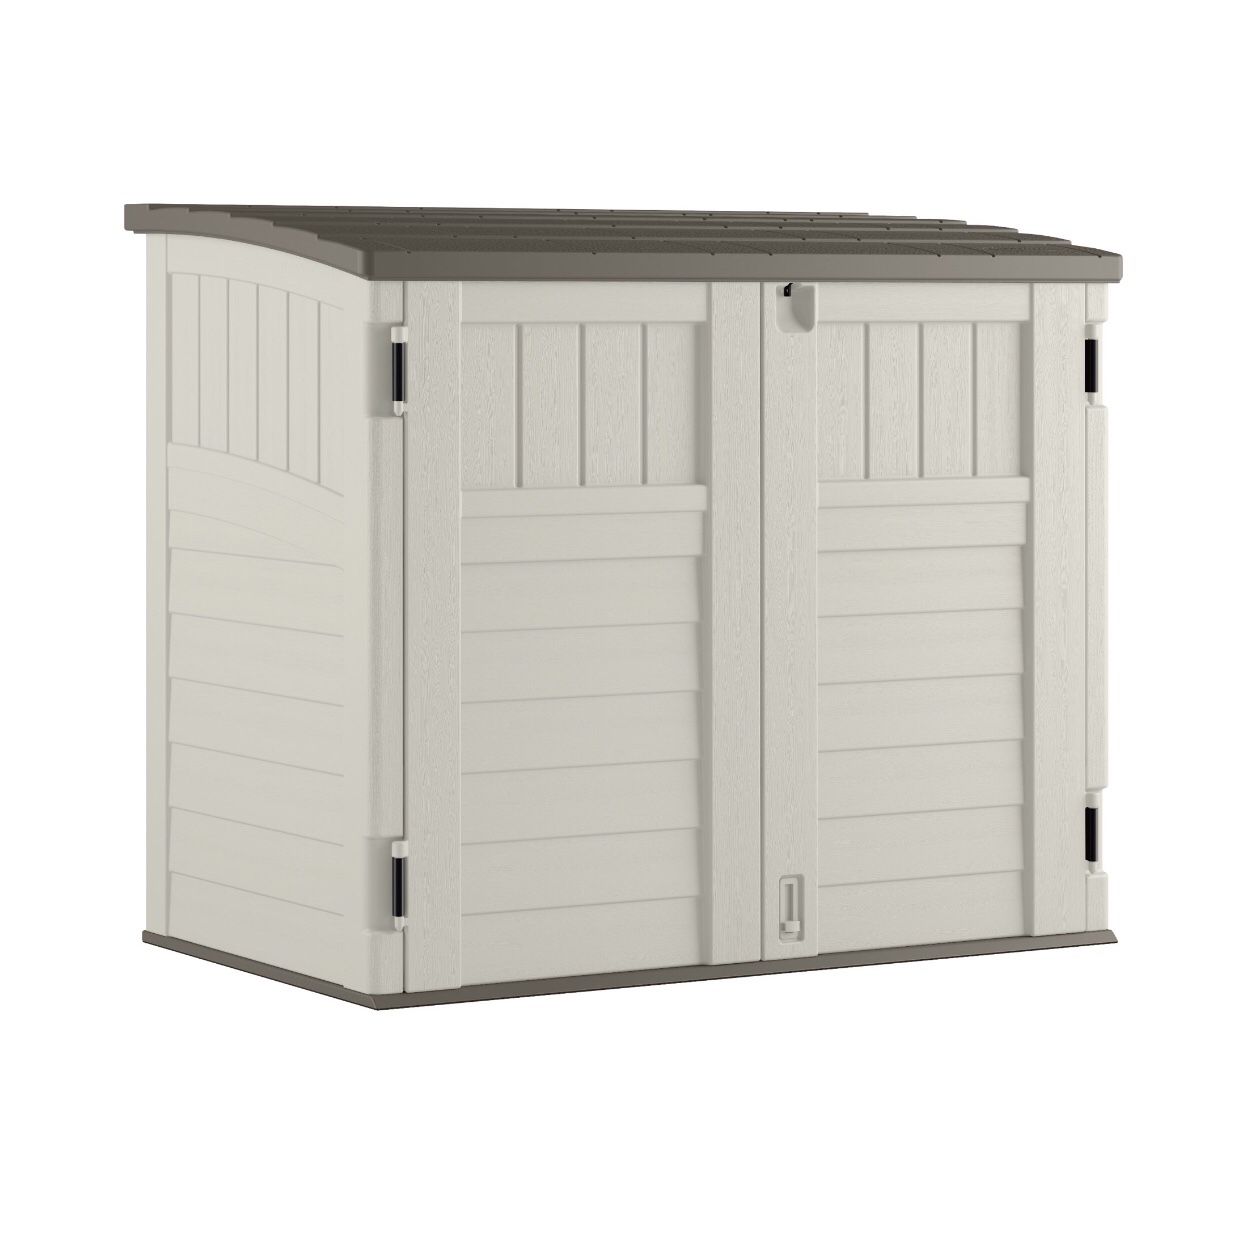 Suncast Horizontal Outdoor Storage Shed Vanilla and Stoney - 34 Cubic Feet